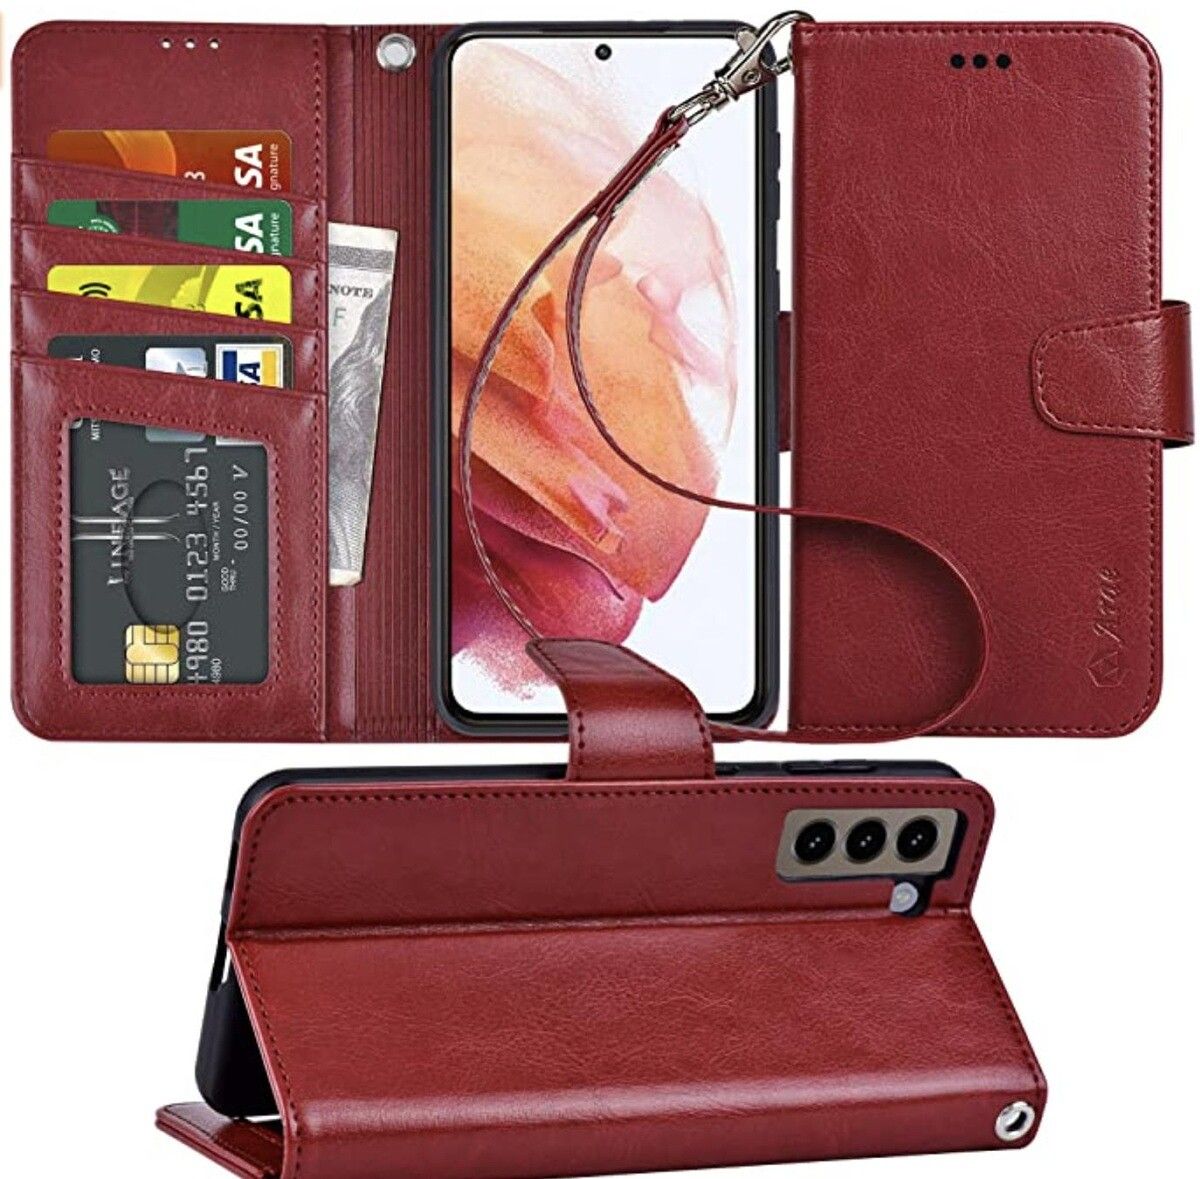 This wallet case, from Arae, sports a PU leather design, four card slots, a cash pocket, a stand function, precise cutouts, a TPU inner case, and a sleek design. You can buy it in black, rose gold, and wine red on Amazon.